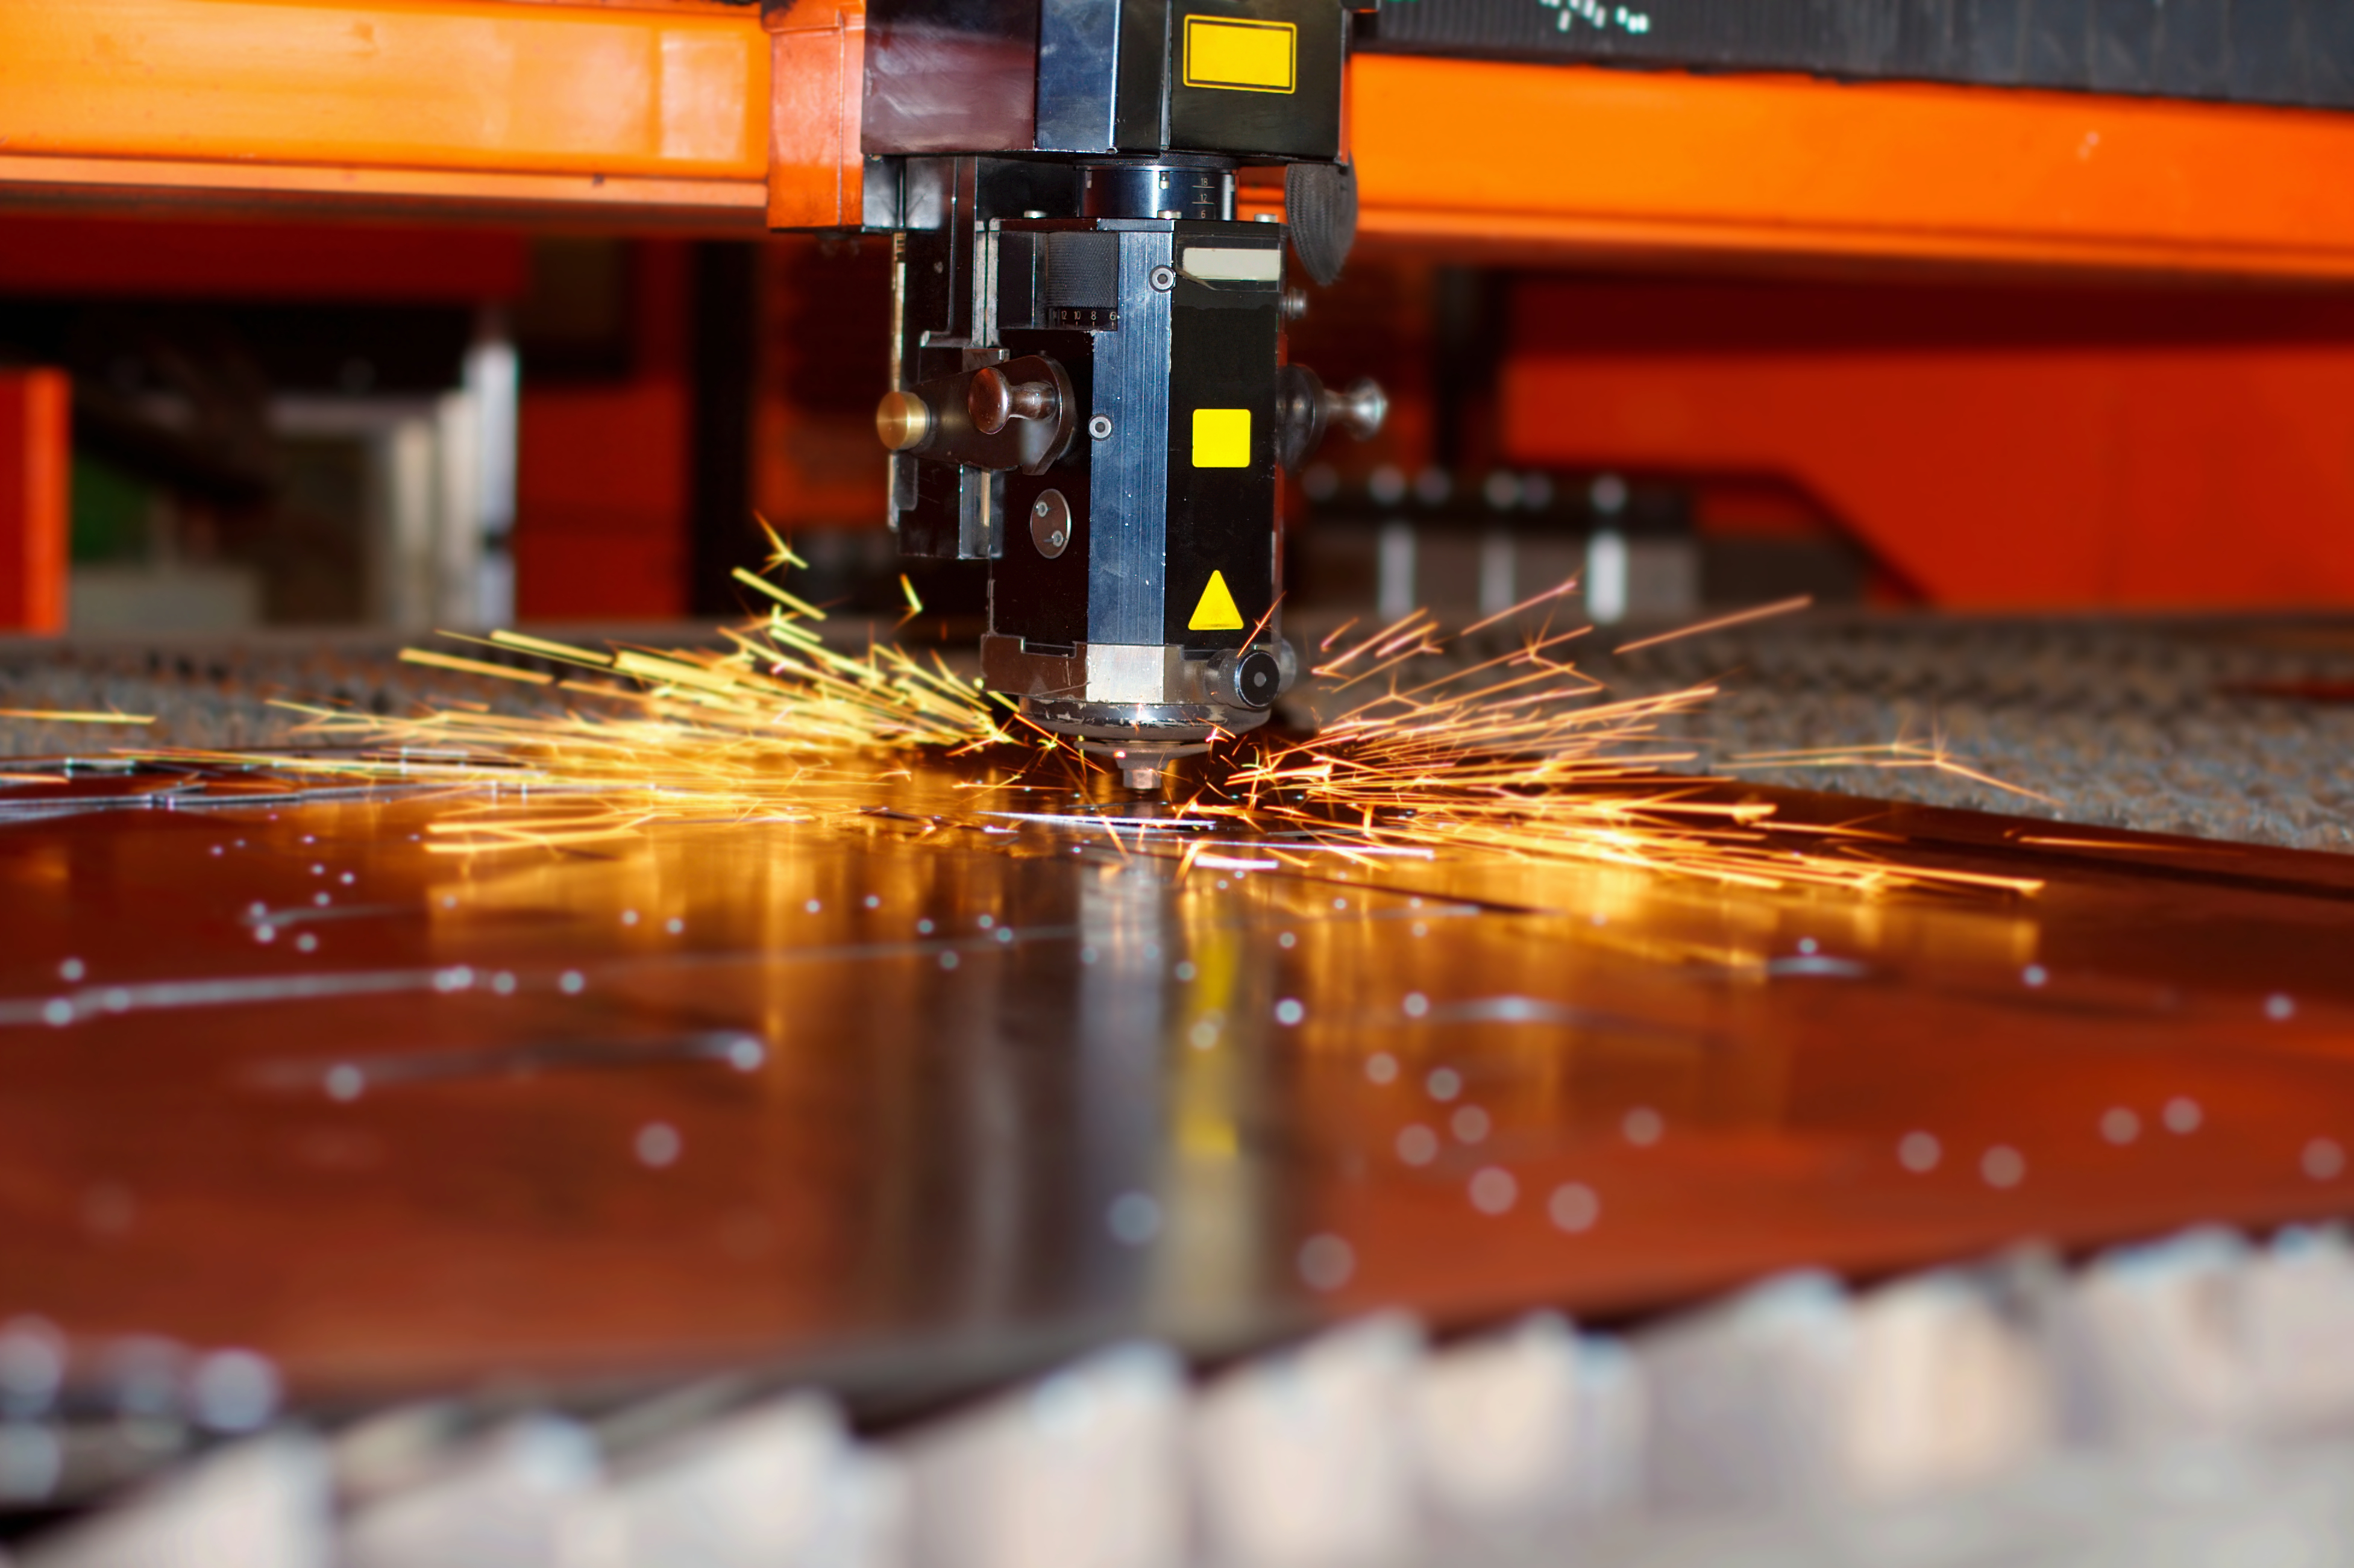 Use this metal-cutting comparison chart to guide your manufacturing decisions